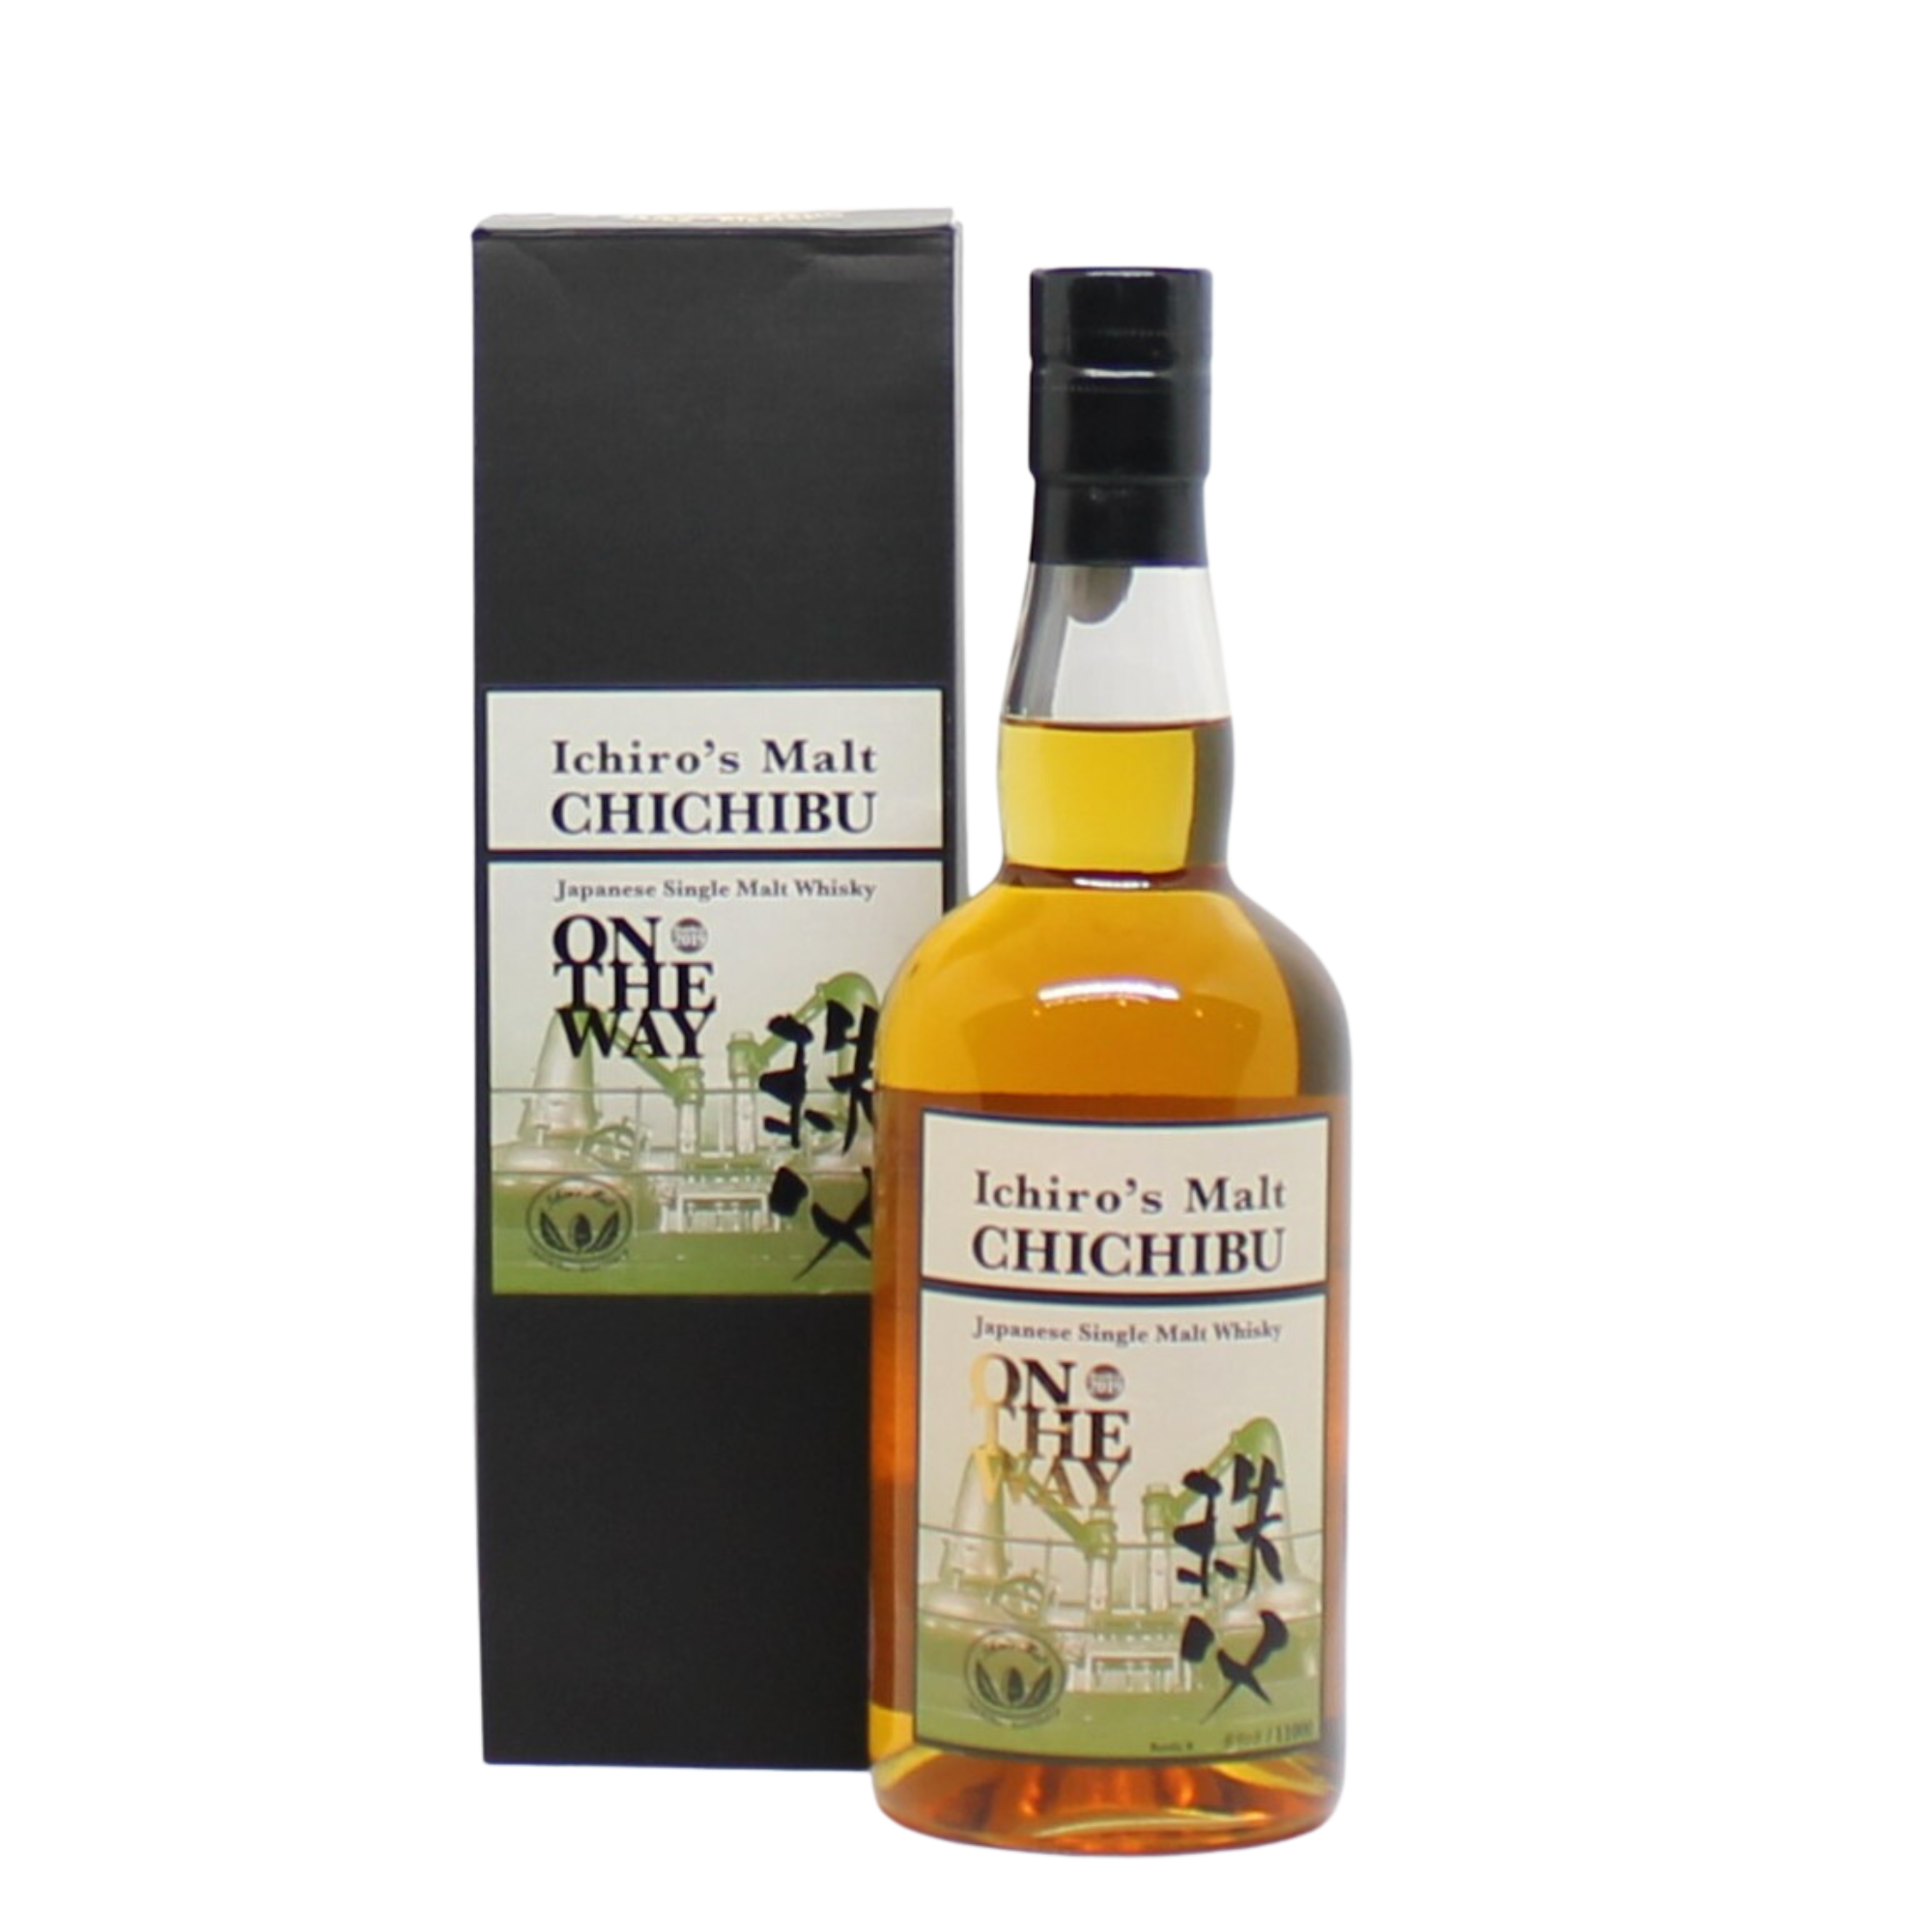 Bottled in 2019. 11,000 Bottles were released. &quot;On The Way&quot; releases of Chichibu are meant to capture the progress of the Distillery as they head towards their first 10 years old Single Malt release in 2020 (a major milestone for the young but very popular distillery). 